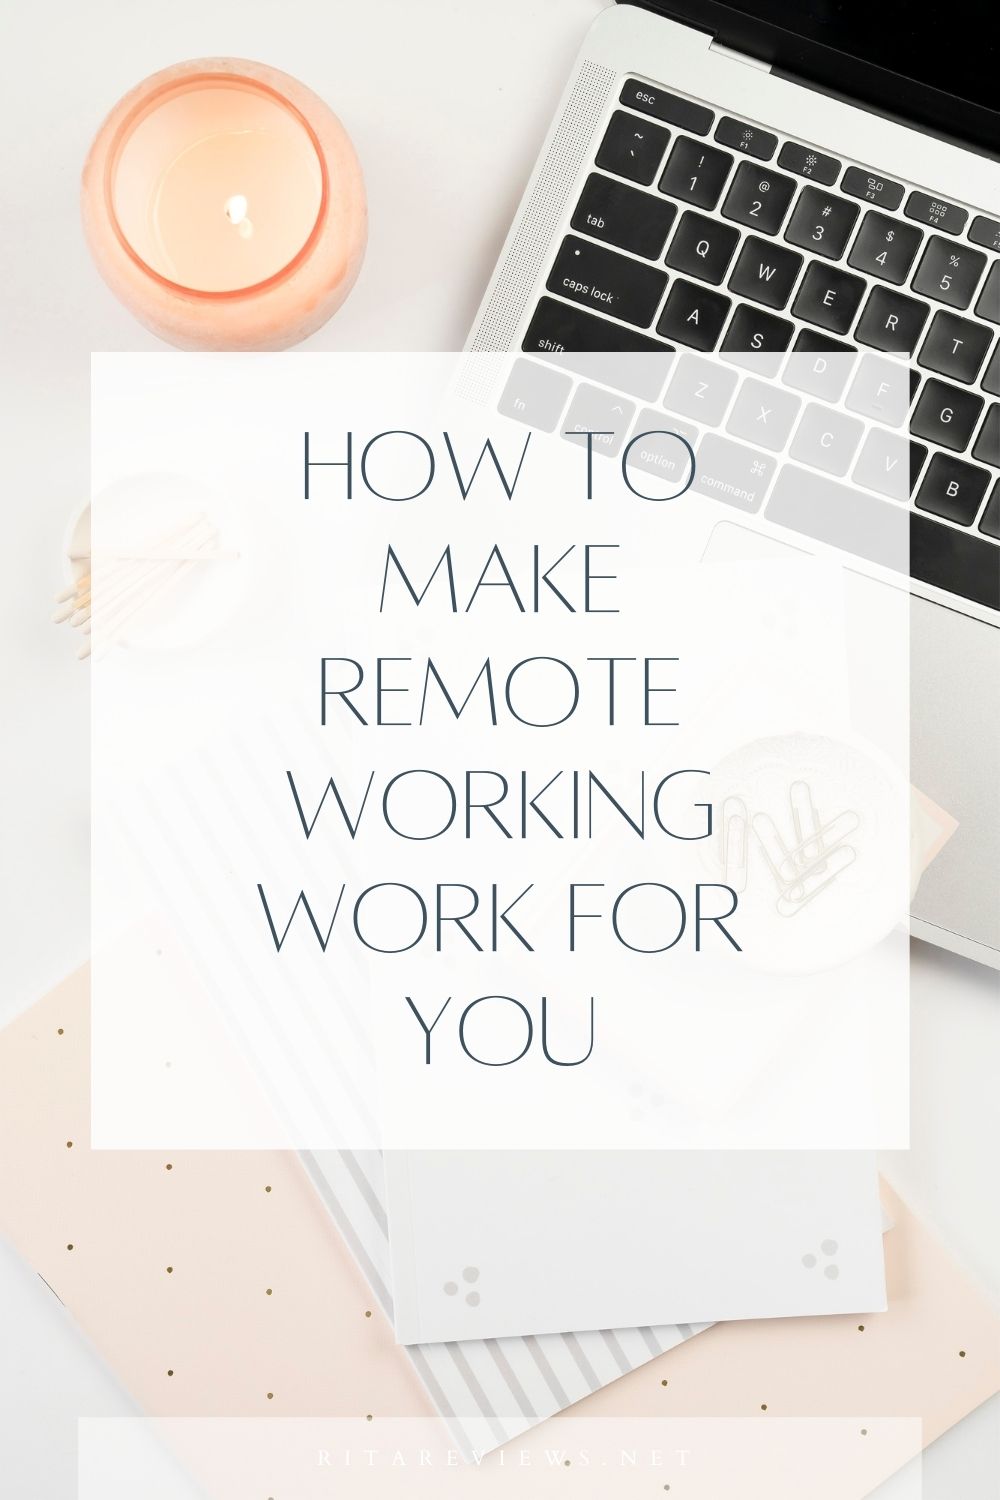 How To Make Remote Working Work For You